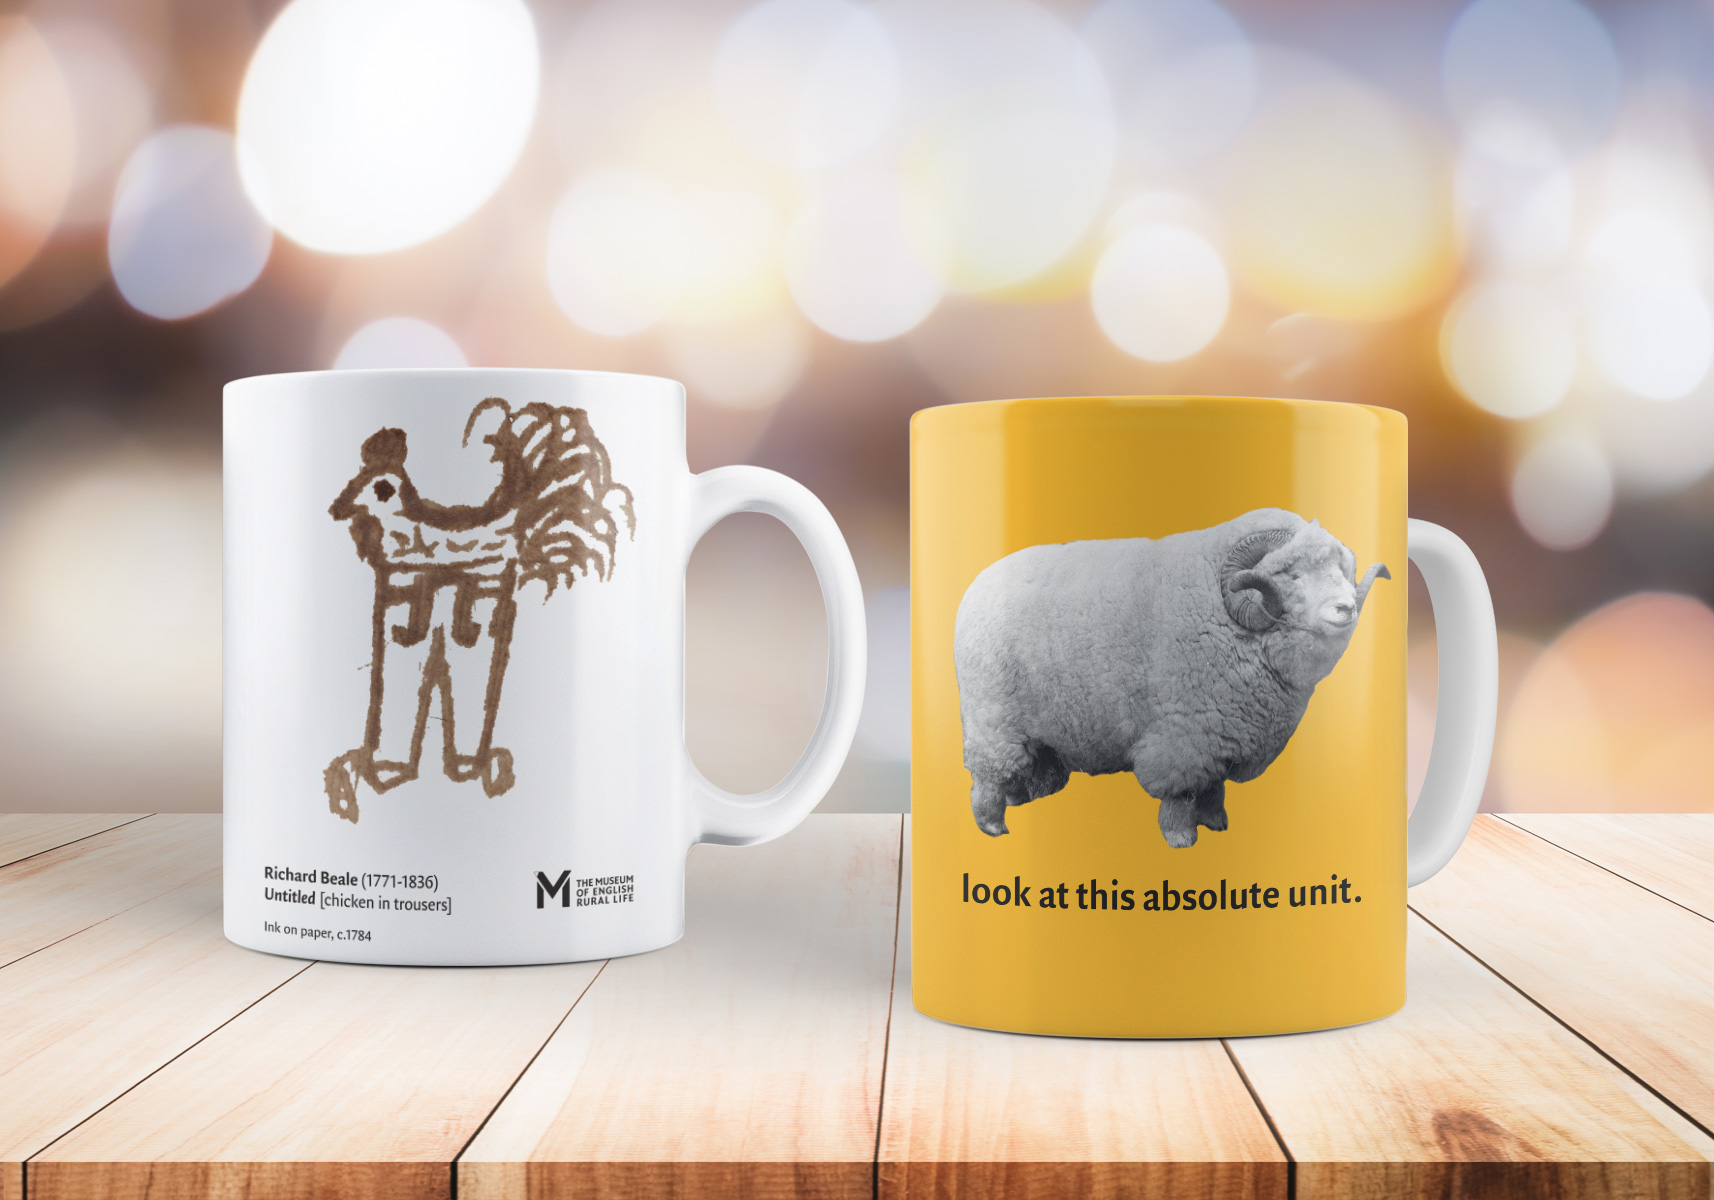 Two new pieces of MERL merchandise available on the Art UK shop.